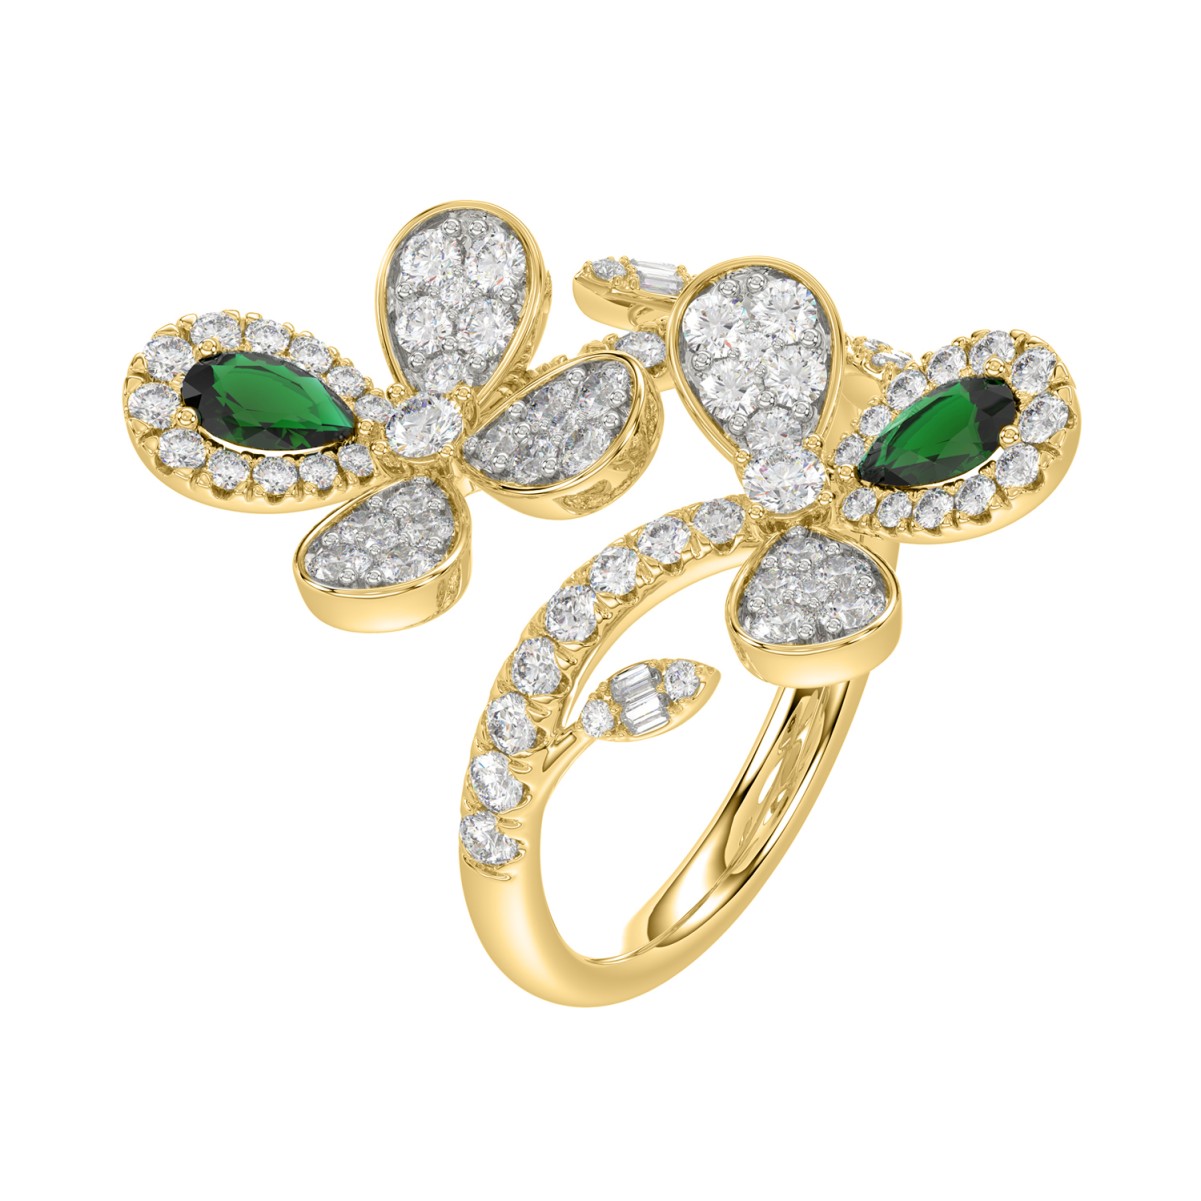 18K YELLOW GOLD 1 1/2CT ROUND/BAGUETTE/PEAR DIAMOND LADIES RING(COLOR STONE PEAR GREEN EMERALD DIAMOND 1 1/2CT)